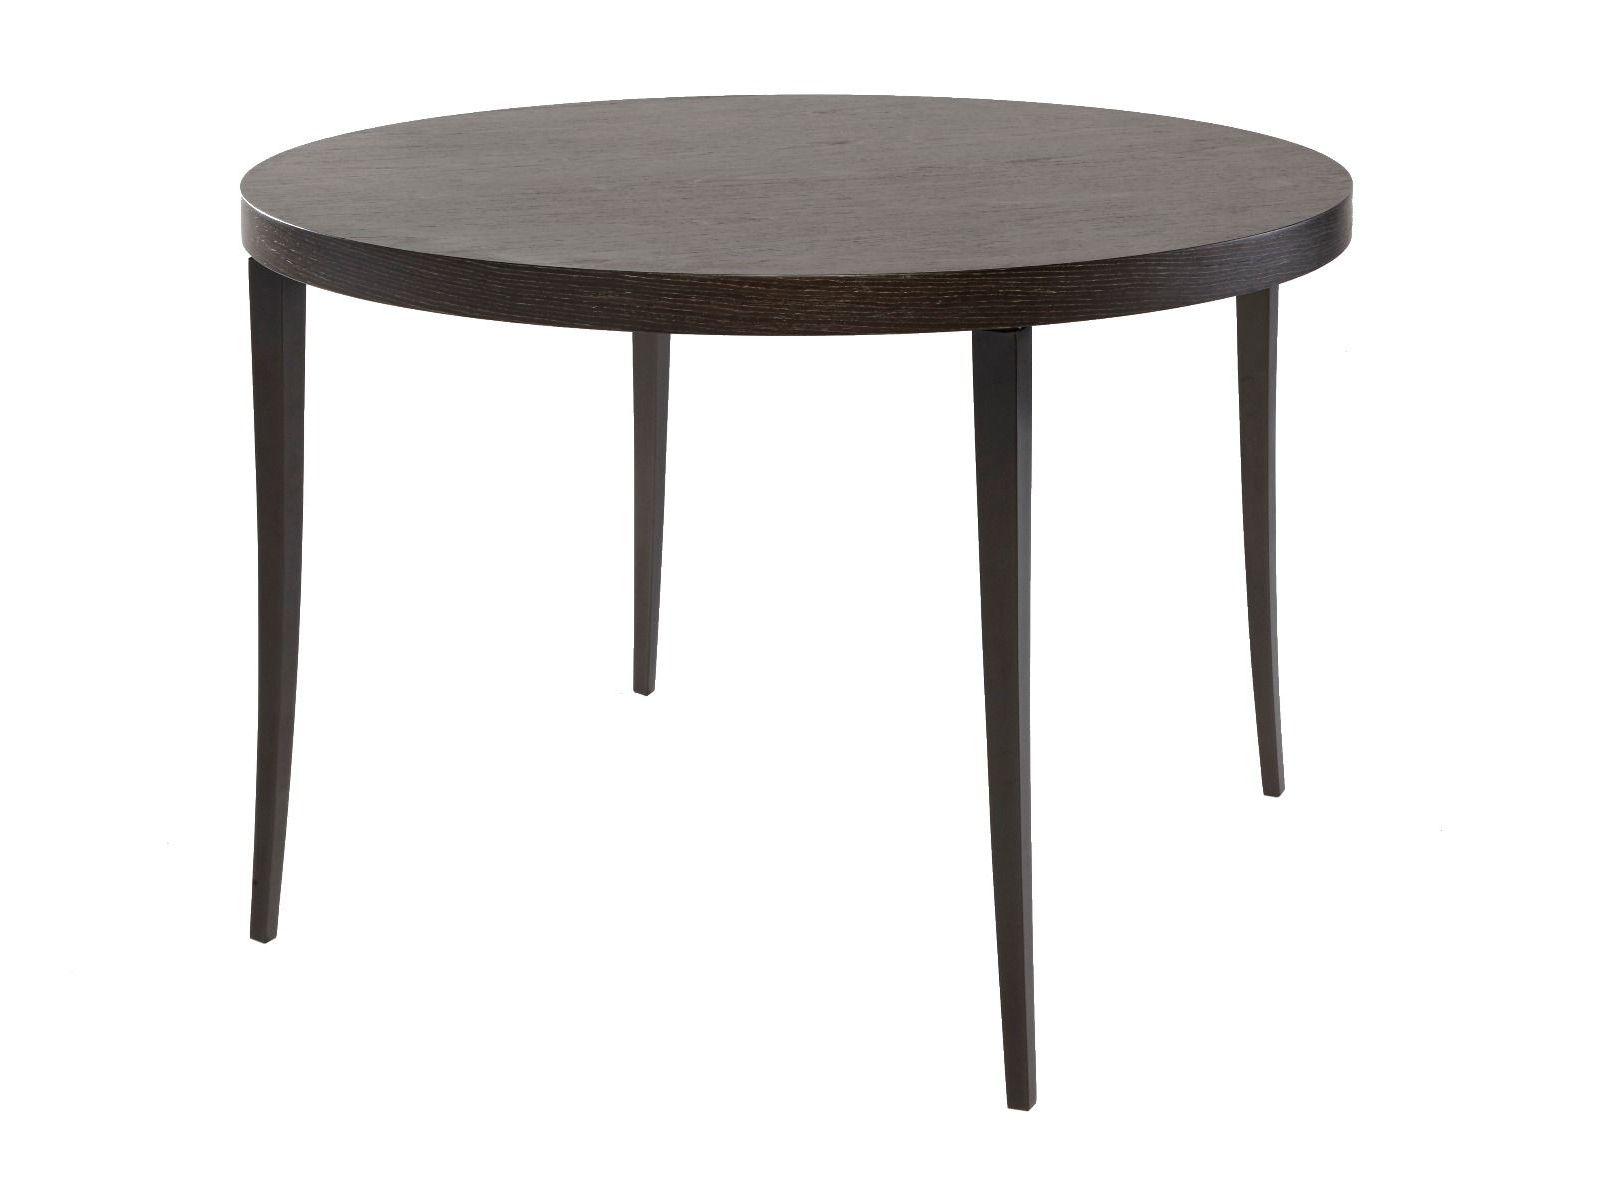 Collection From Gillmore For Most Recent Circular Dining Tables (View 15 of 25)